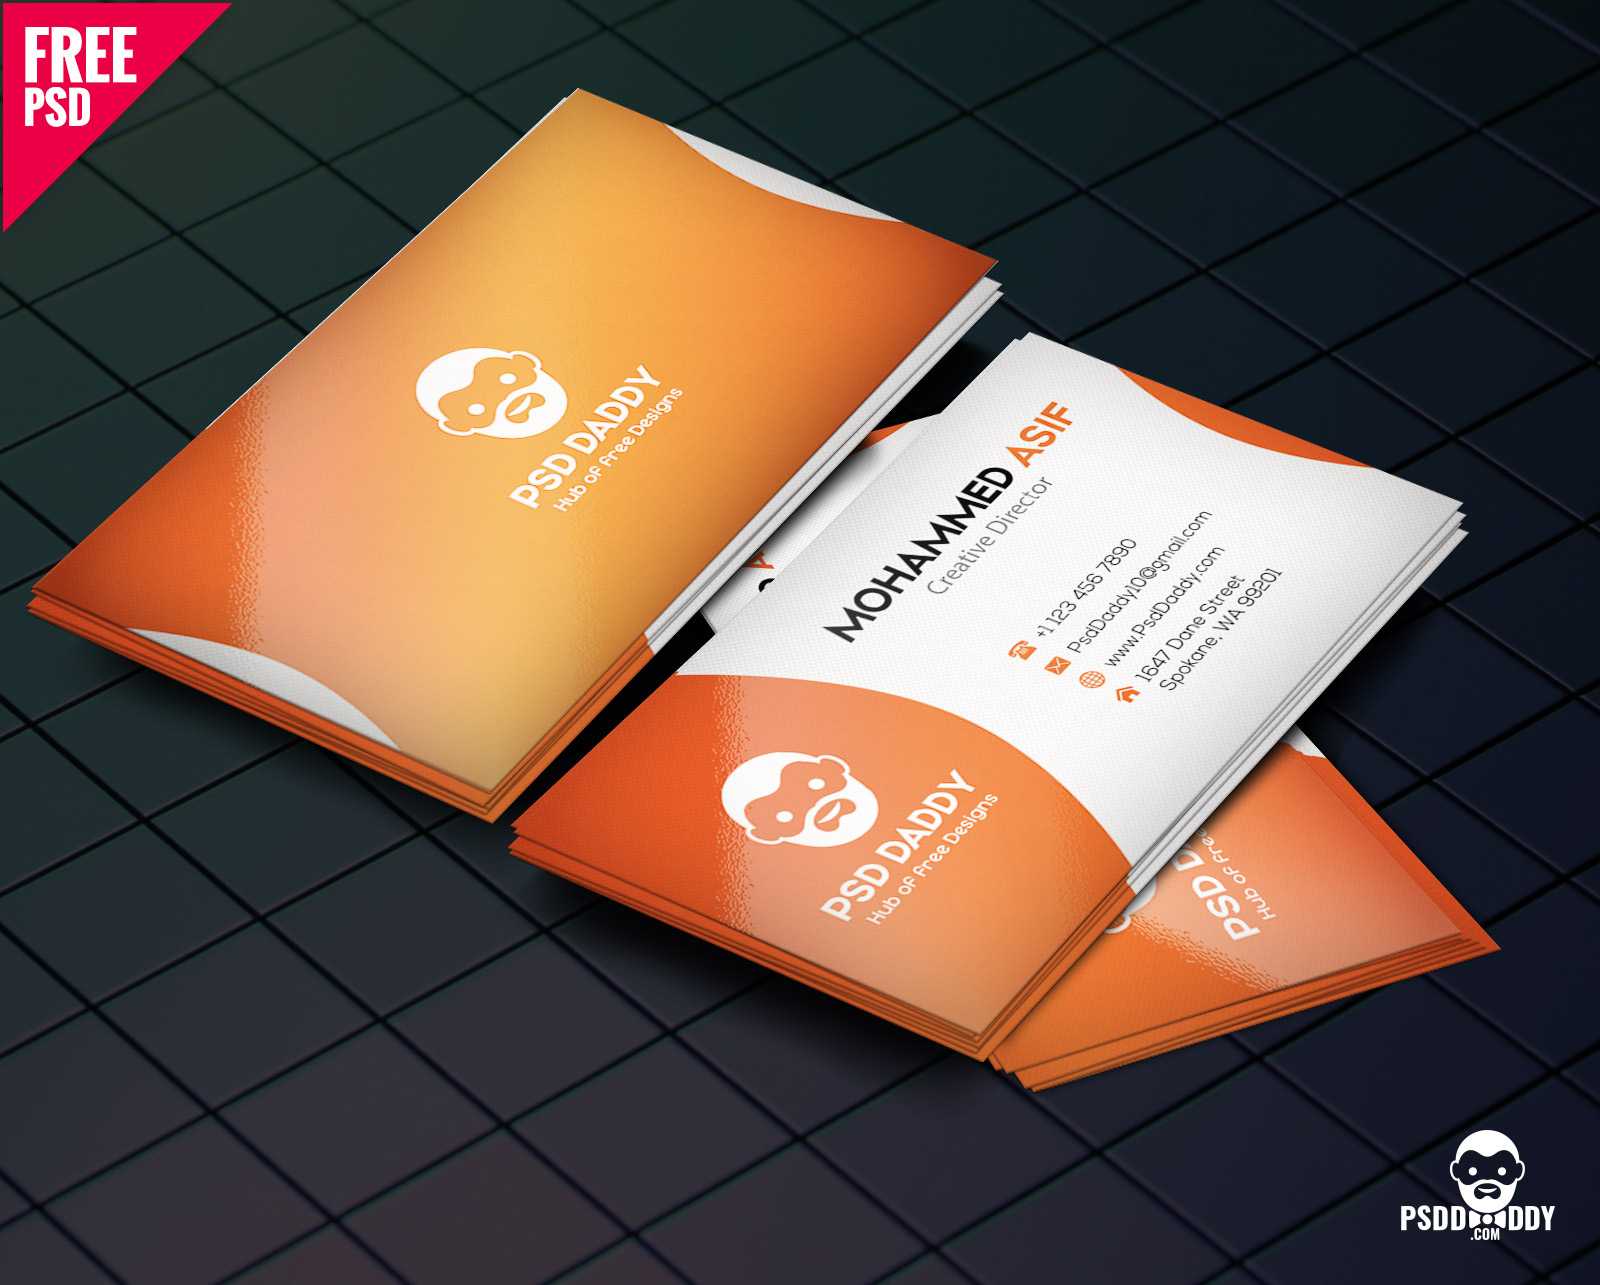 Download] Business Card Design Psd Free | Psddaddy Within Visiting Card Psd Template Free Download